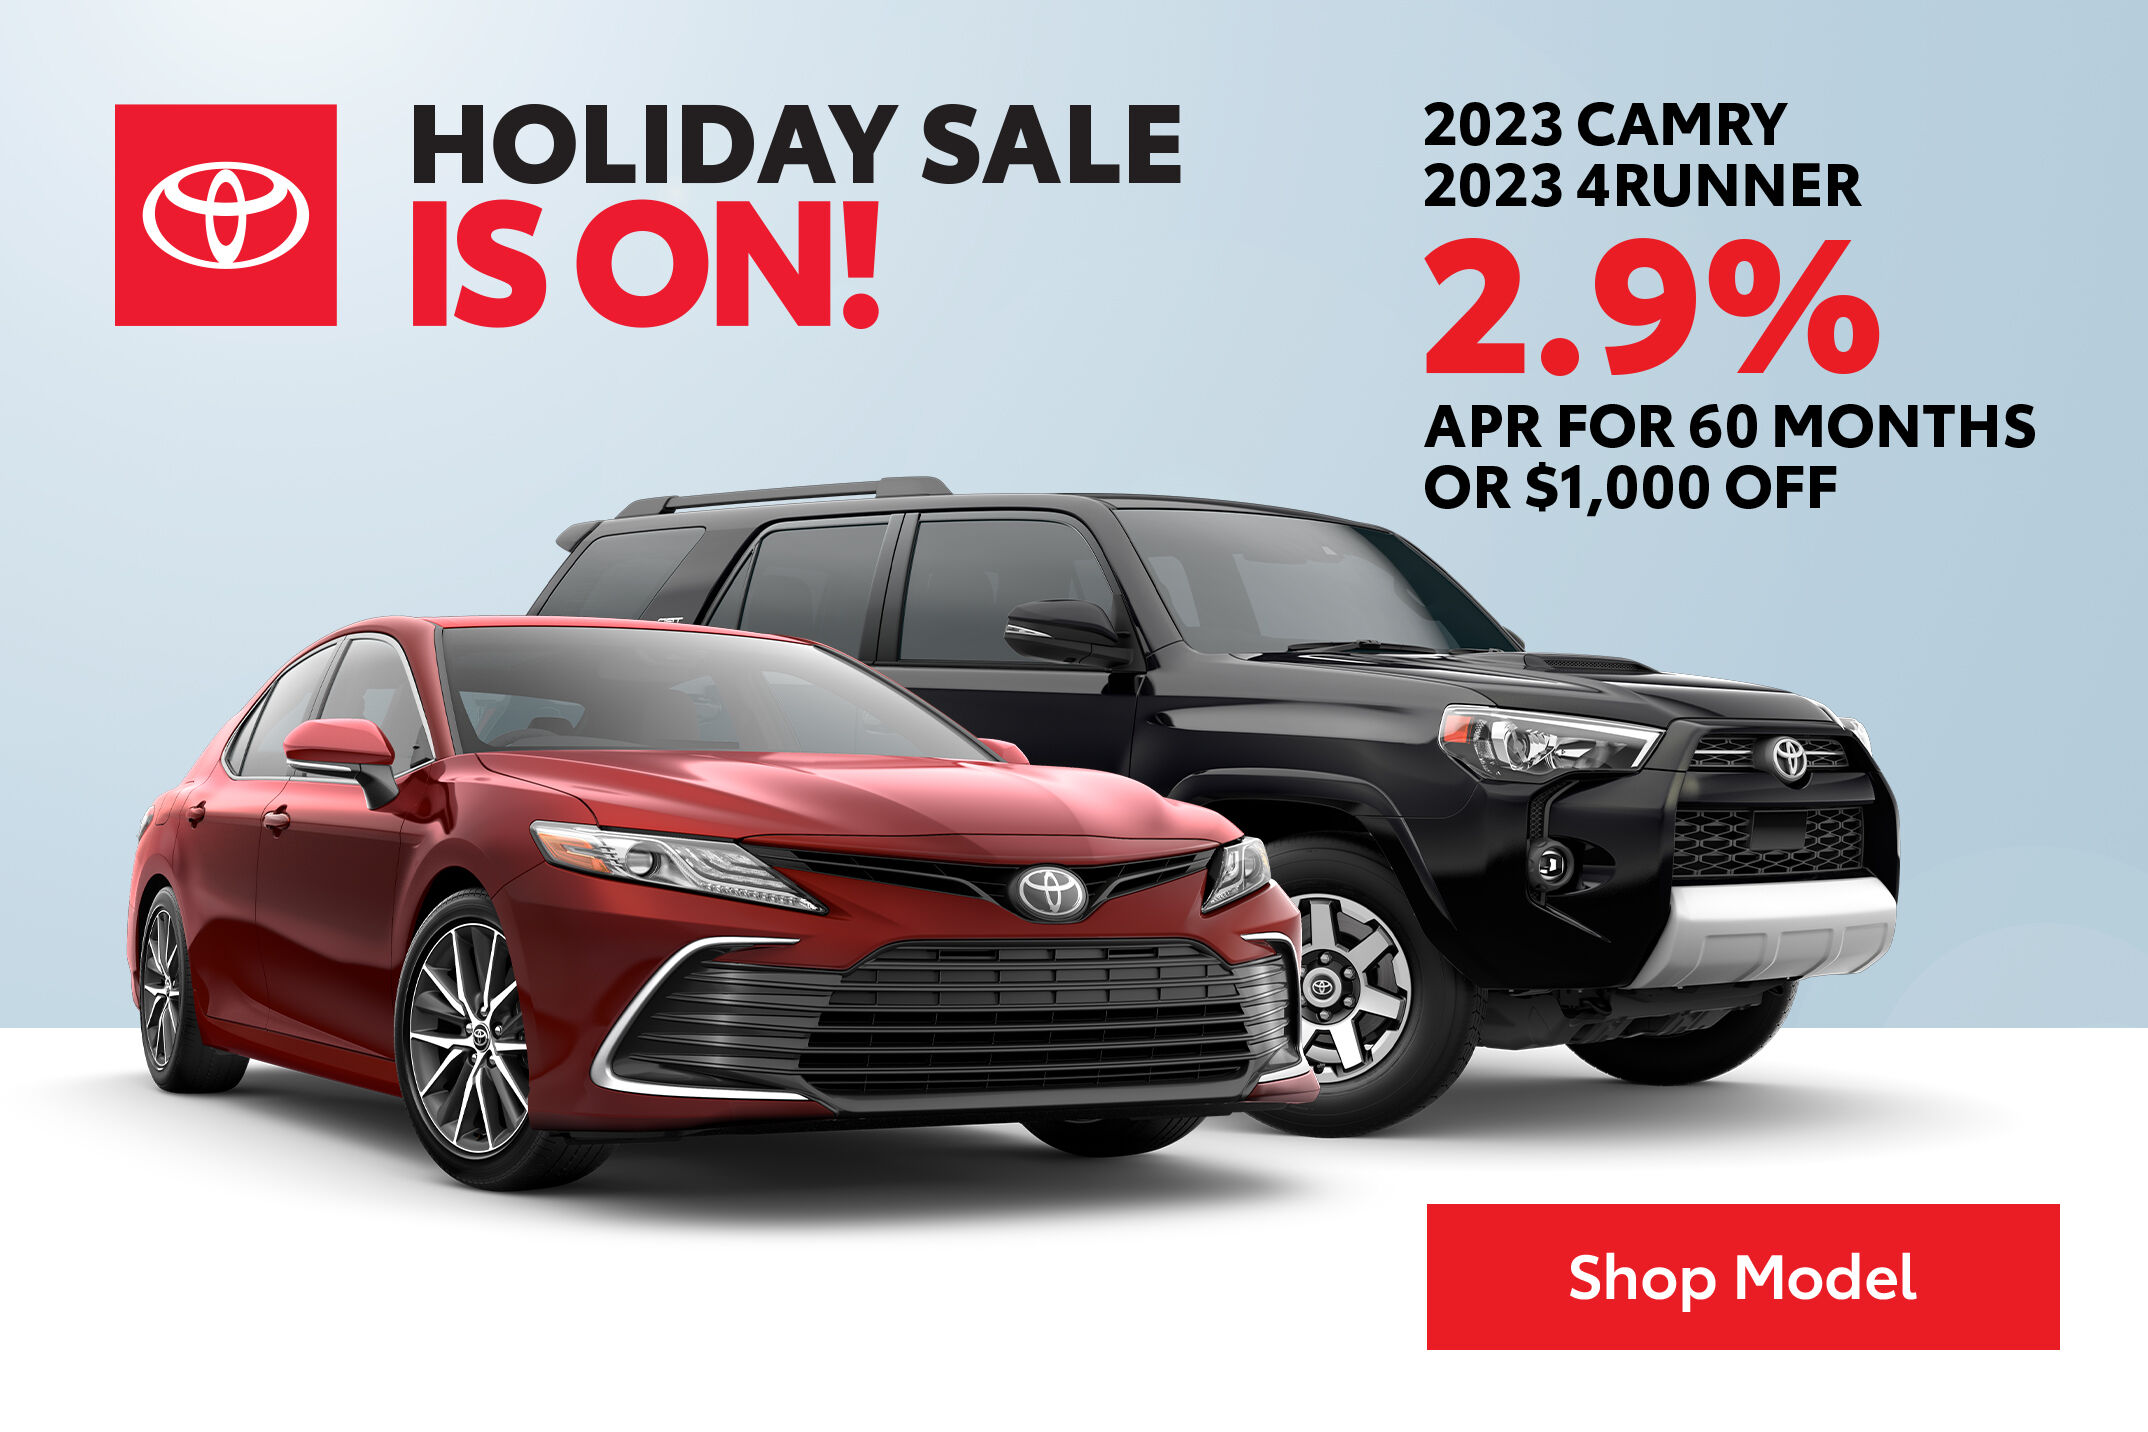 Holiday Sale - 2023 4Runner & Camry - 2.9% APR for 60 months or $1,000 off